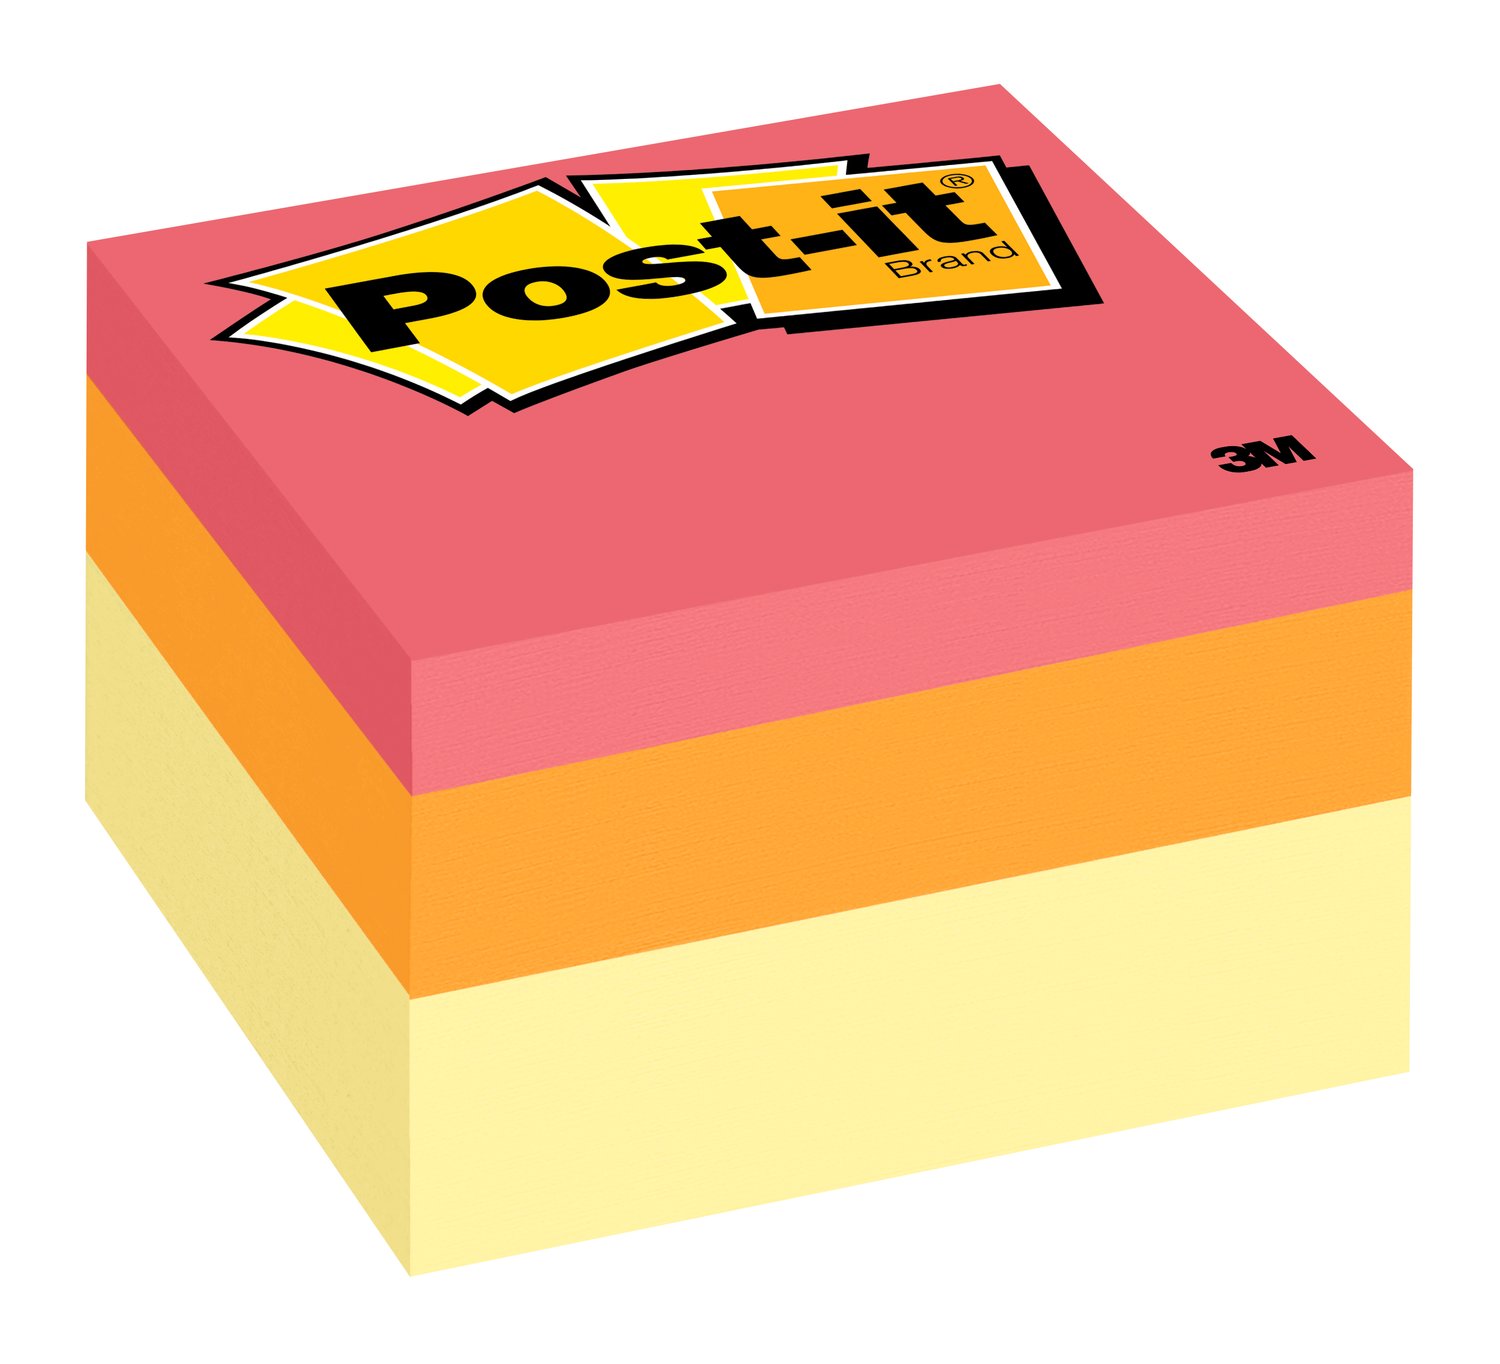 7010371009 - Post-it Notes Cube 2053-AU 3 in x 3 in, Canary Wave